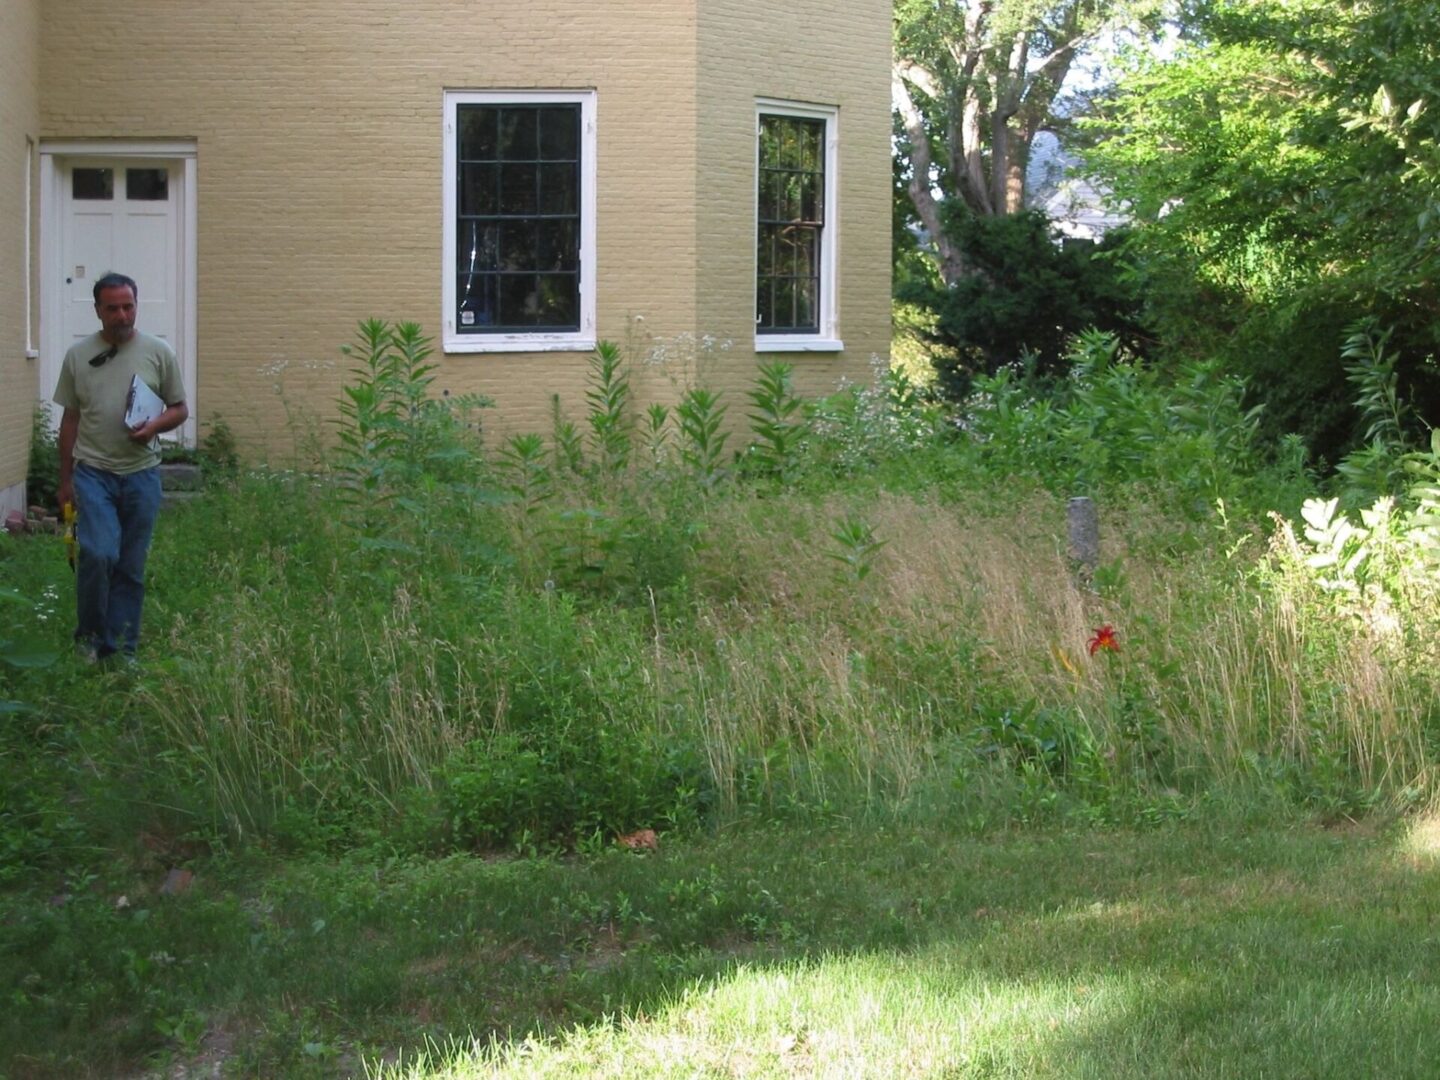 A house with tall grass growing in the yard.